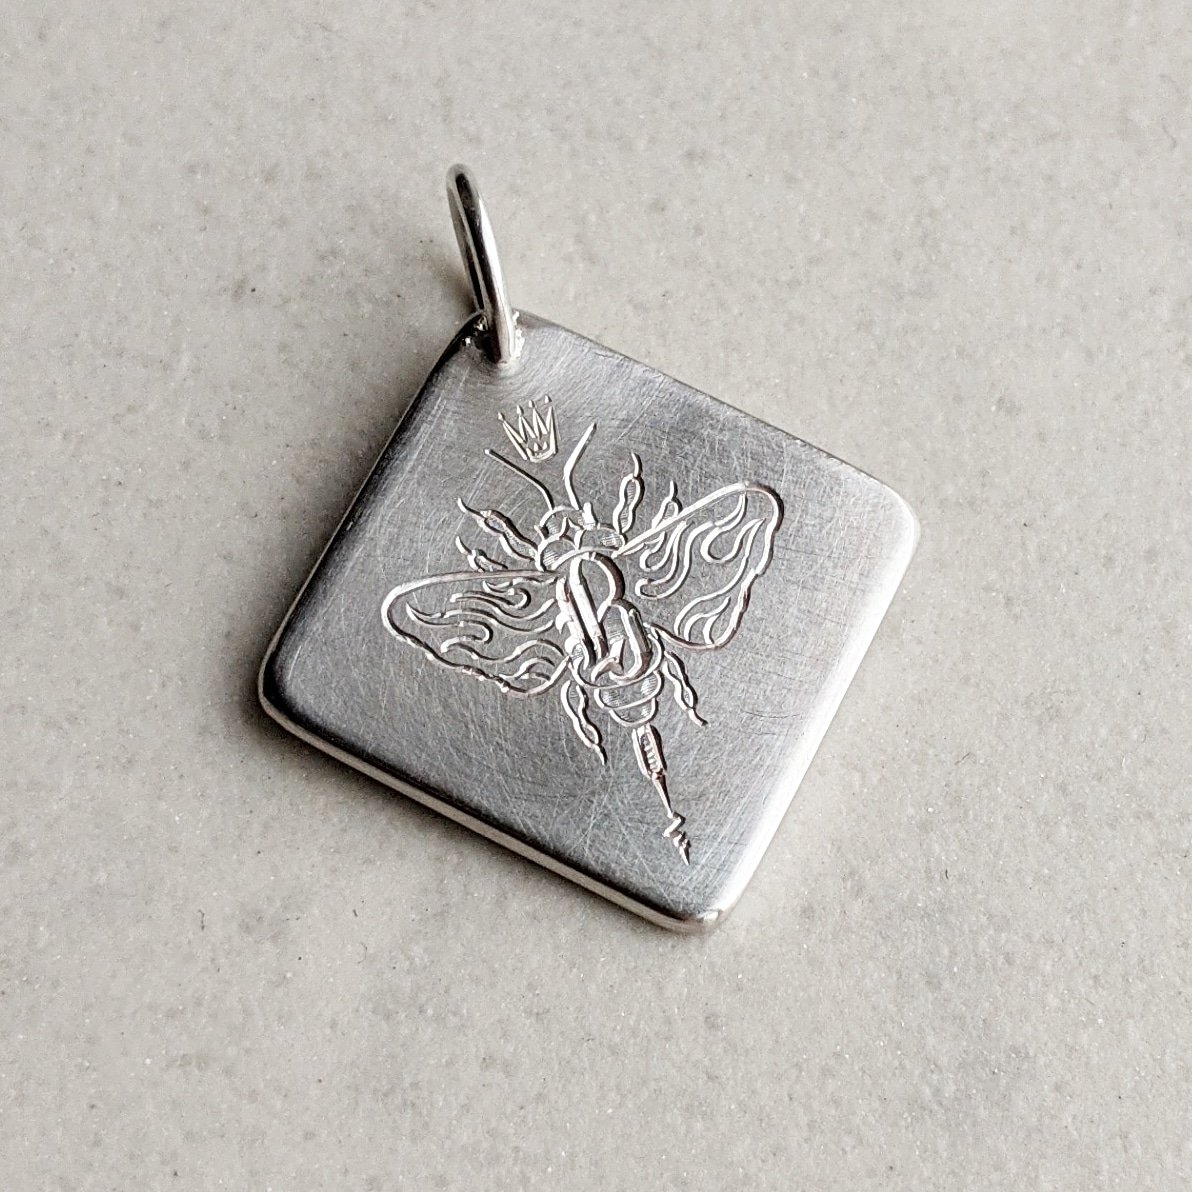 Bee pendant...hand engraved on satin silver. Not quite the return to work & school we planned...let the juggle continue! @rosalynemporium #tuesdayvibe #beependant #lockdown #juggle